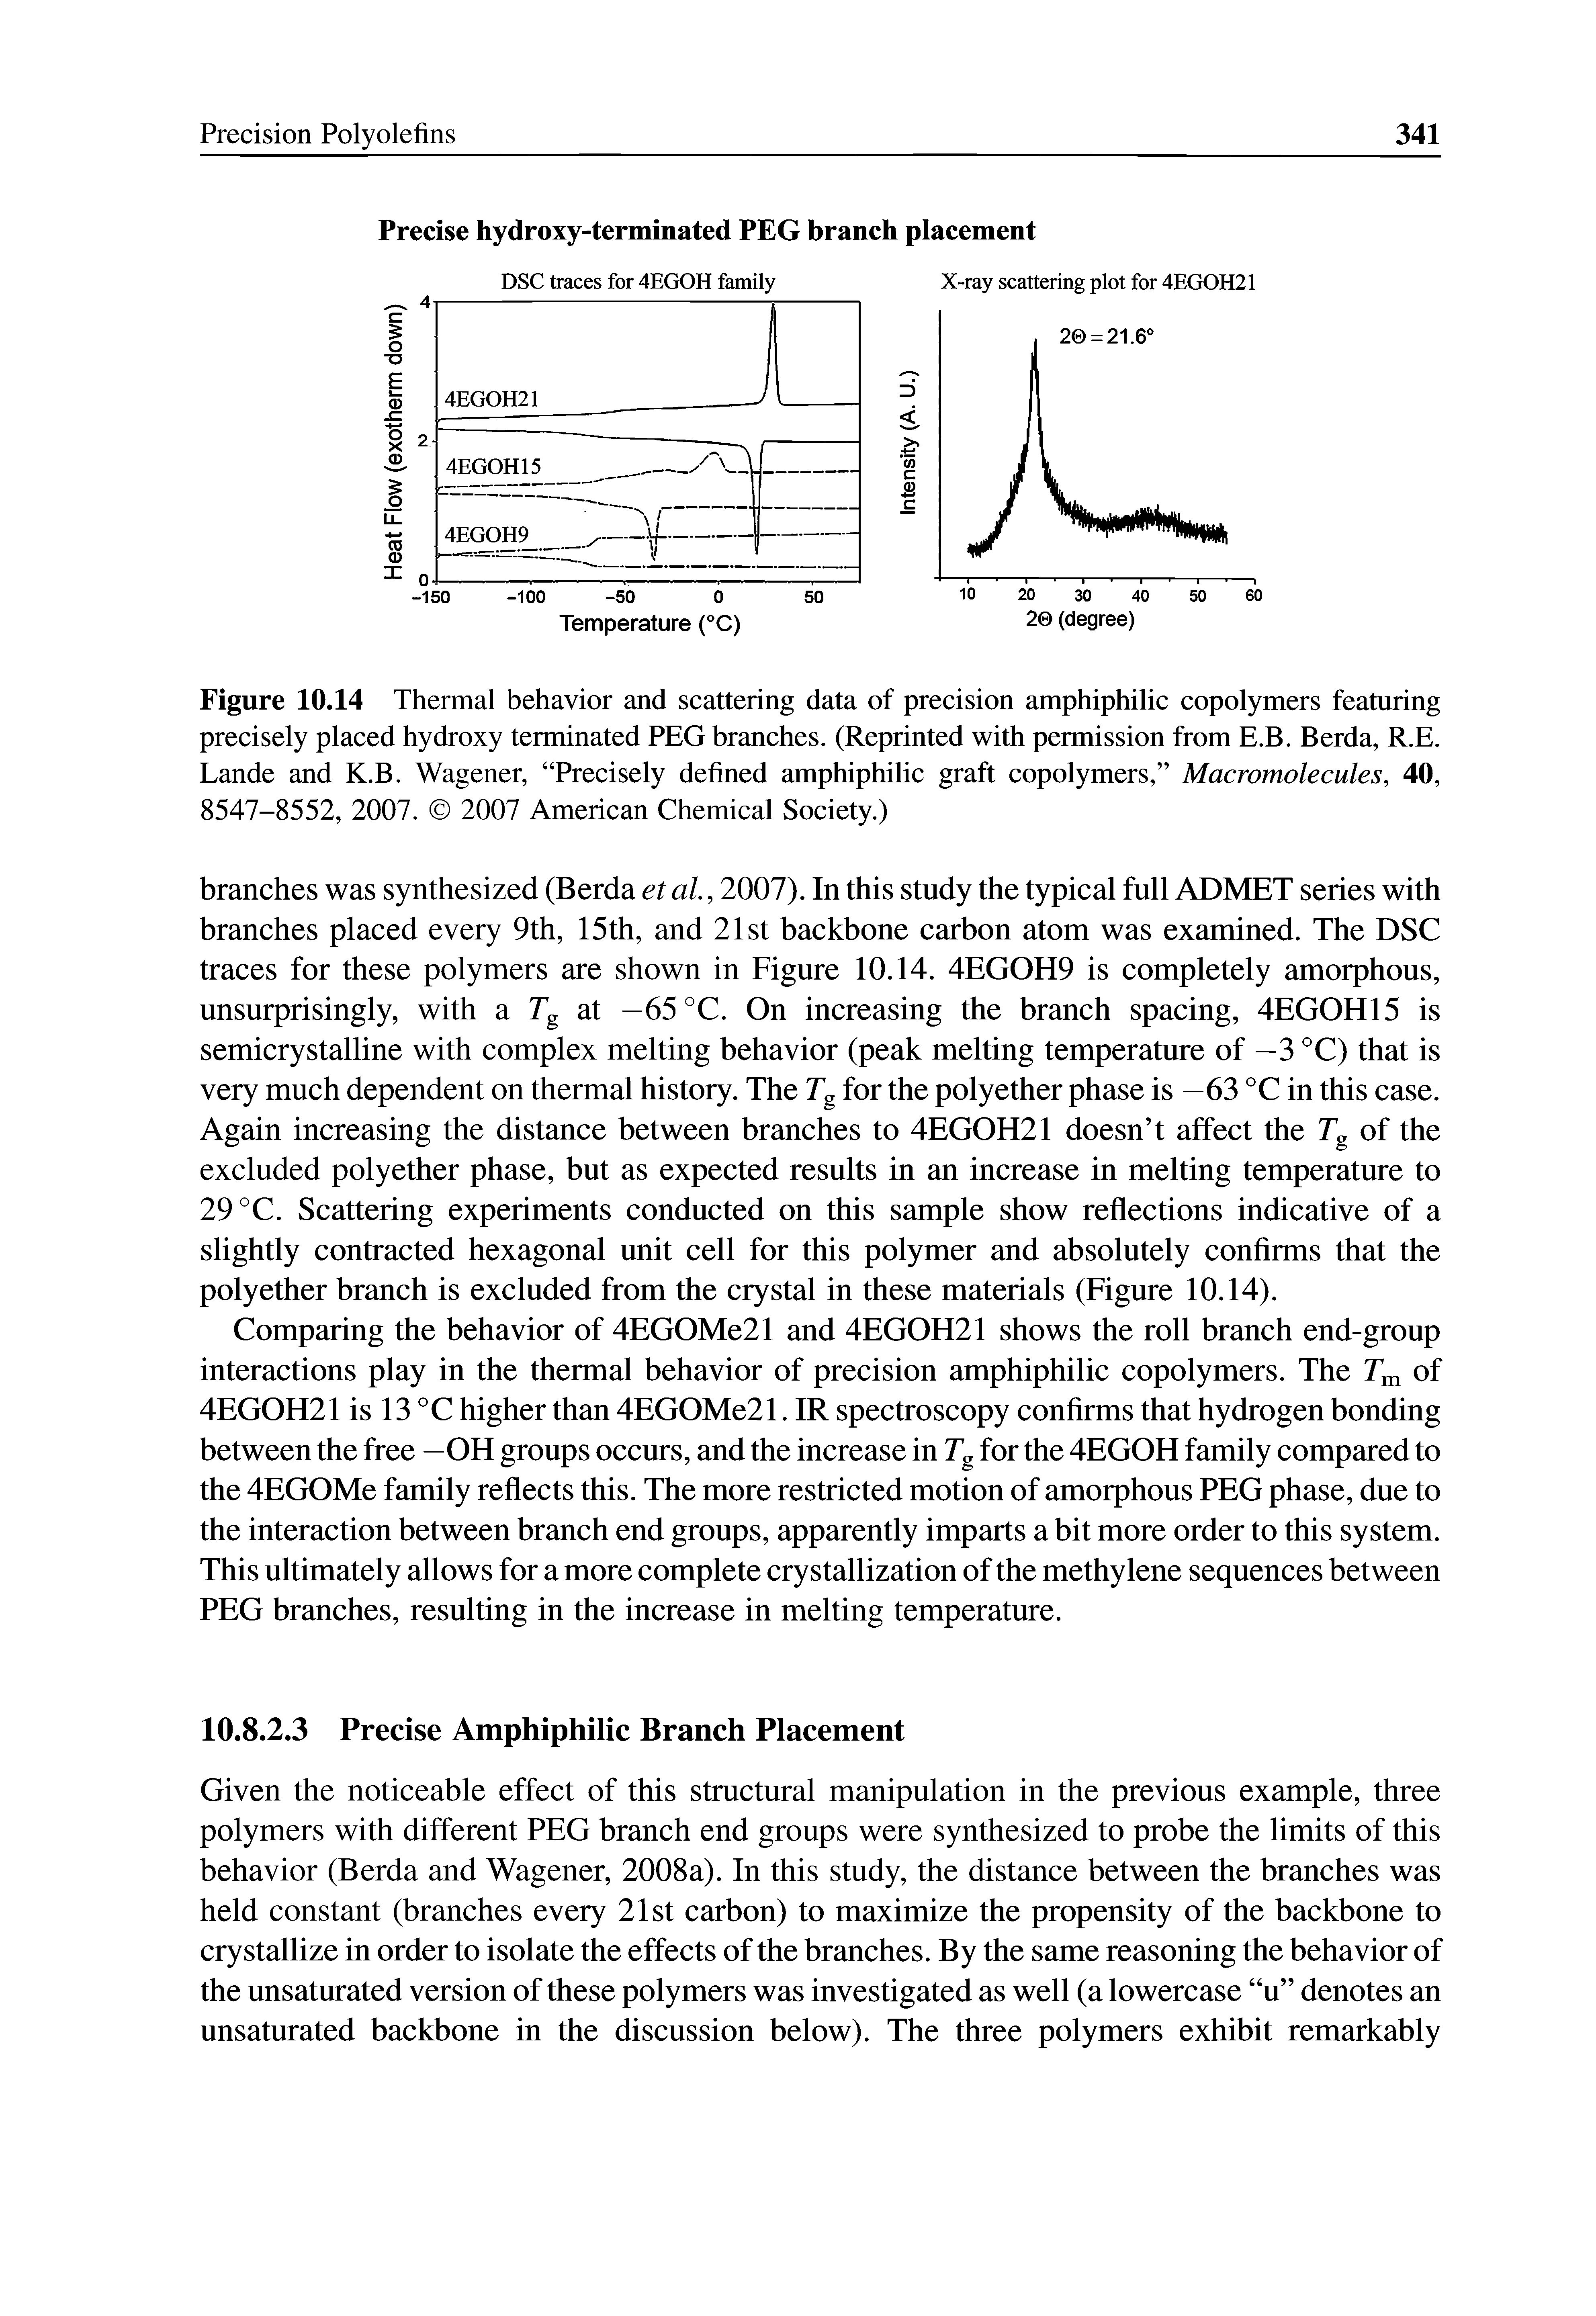 Figure 10.14 Thermal behavior and scattering data of precision amphiphilic copolymers featuring precisely placed hydroxy terminated PEG branches. (Reprinted with permission from E.B. Berda, R.E. Lande and K.B. Wagener, Precisely defined amphiphilic graft copolymers, Macromolecules, 40, 8547-8552, 2007. 2007 American Chemical Society.)...